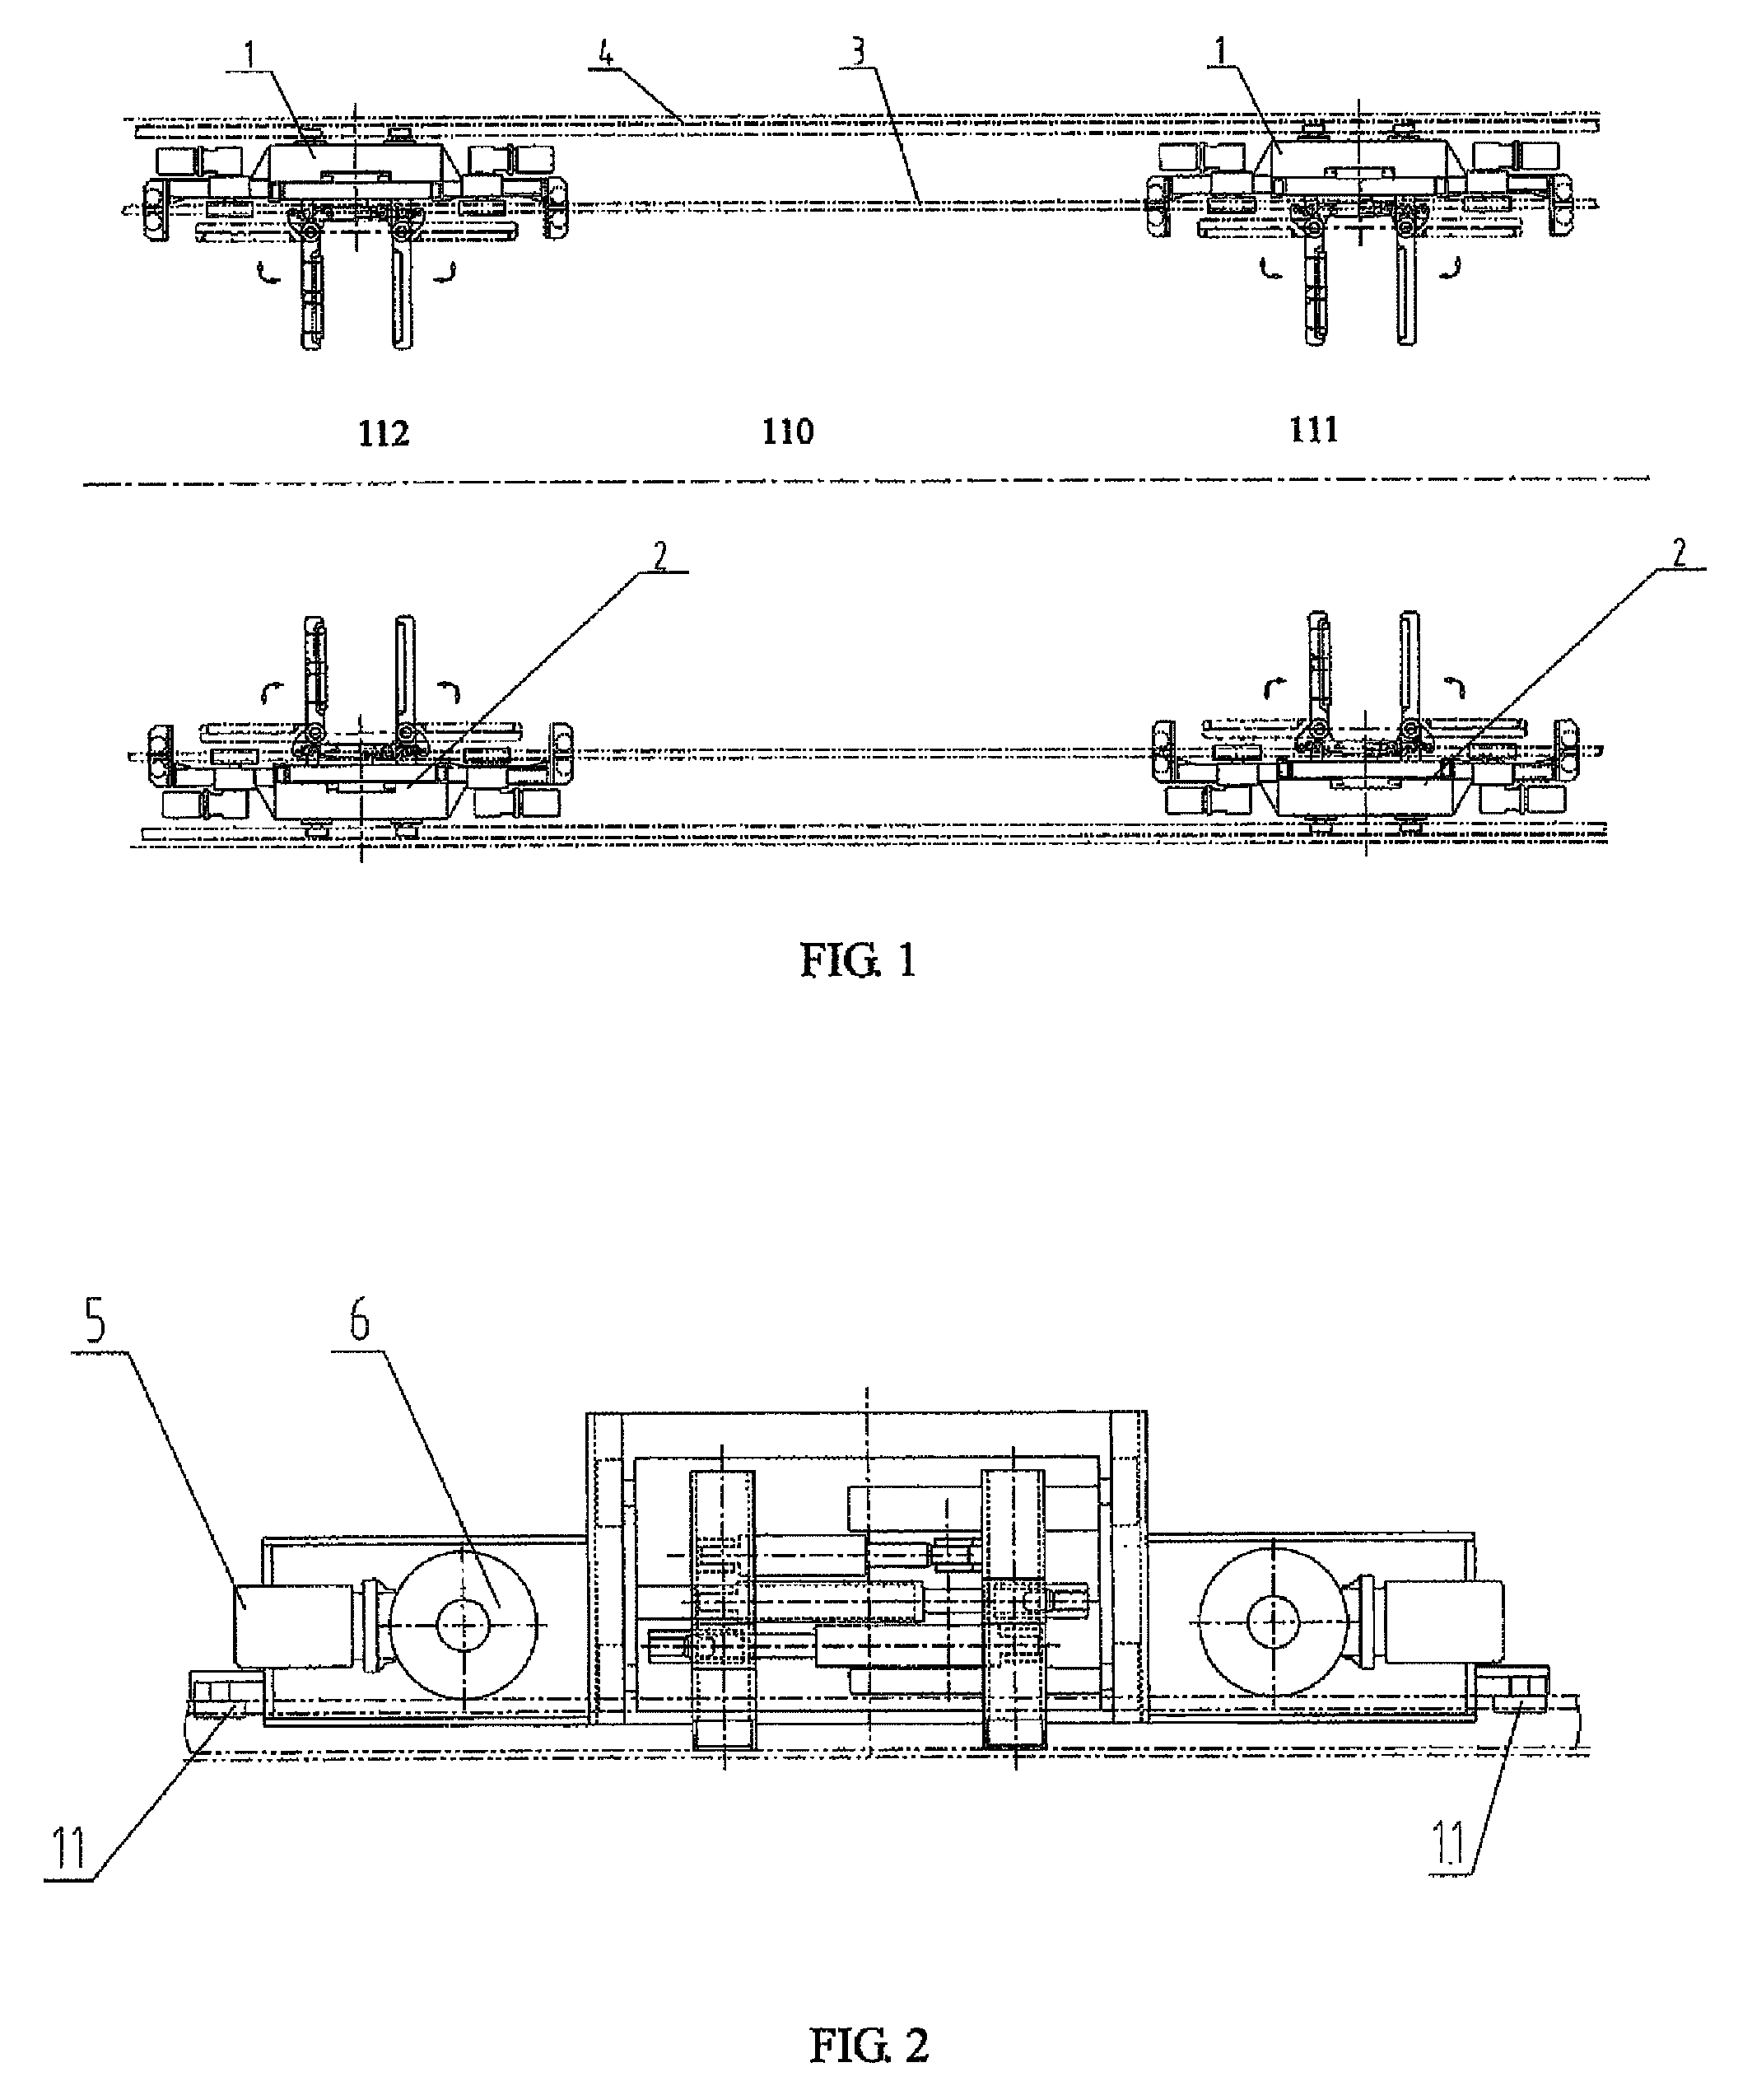 Trailer system and method for inspecting vehicle by radiation imaging of vehicle through trailer system